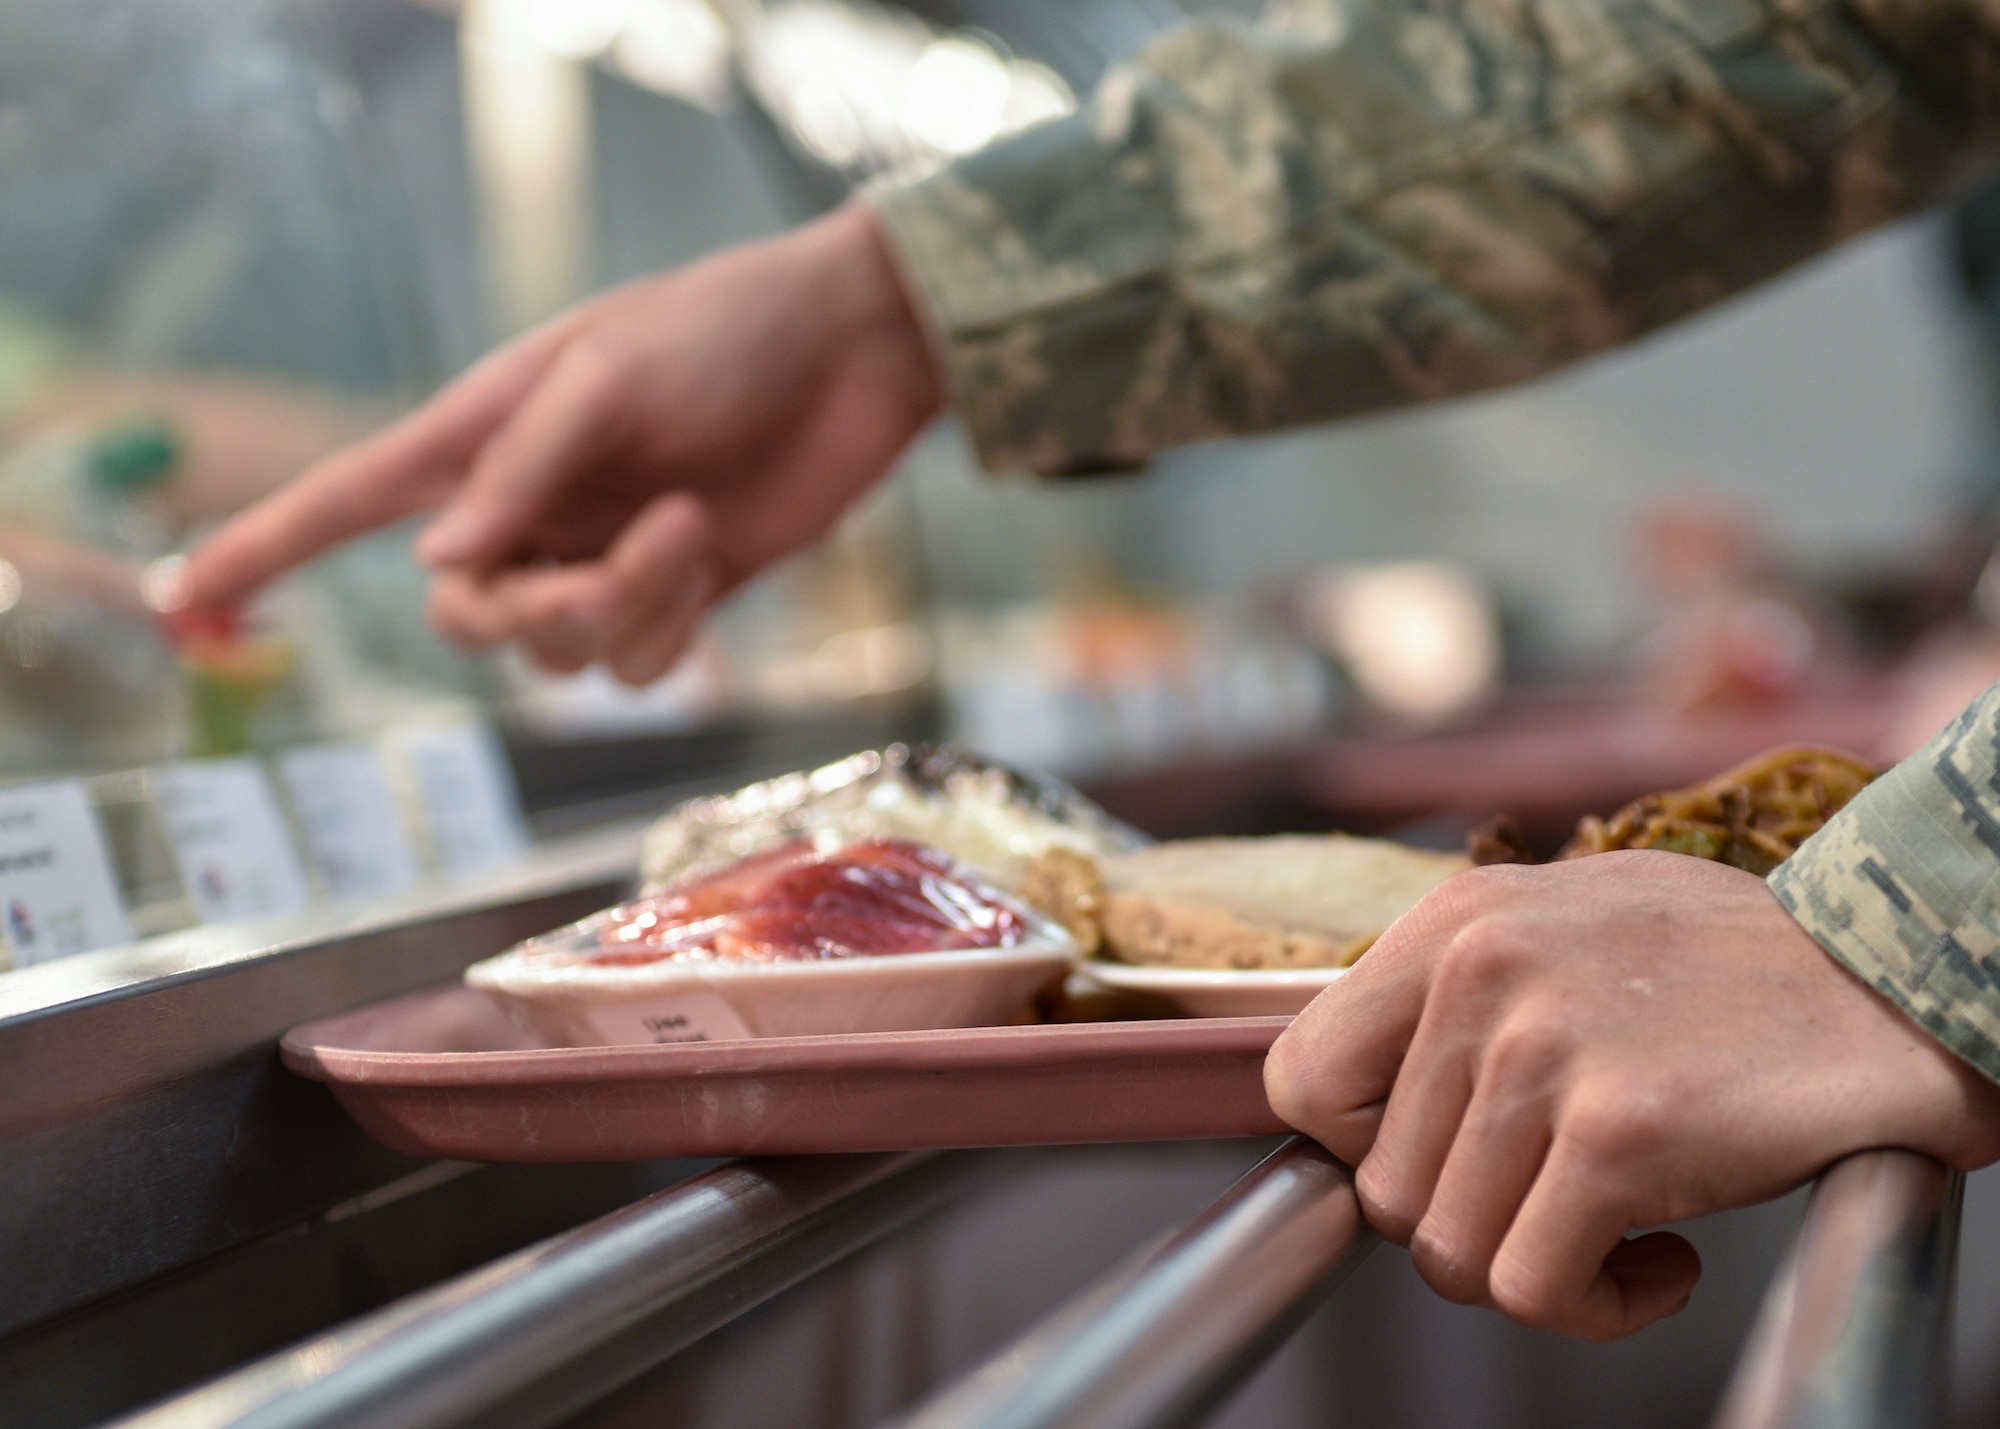 A patron of Thunderbird Inn points to his entree selection at Kirtland Air Force Base, N.M., Jan. 22, 2019. The Hennessy Award Program recognizes exceptional food service support within the Air Force. (U.S. Air Force photo by Airman 1st Class Austin J. Prisbrey)